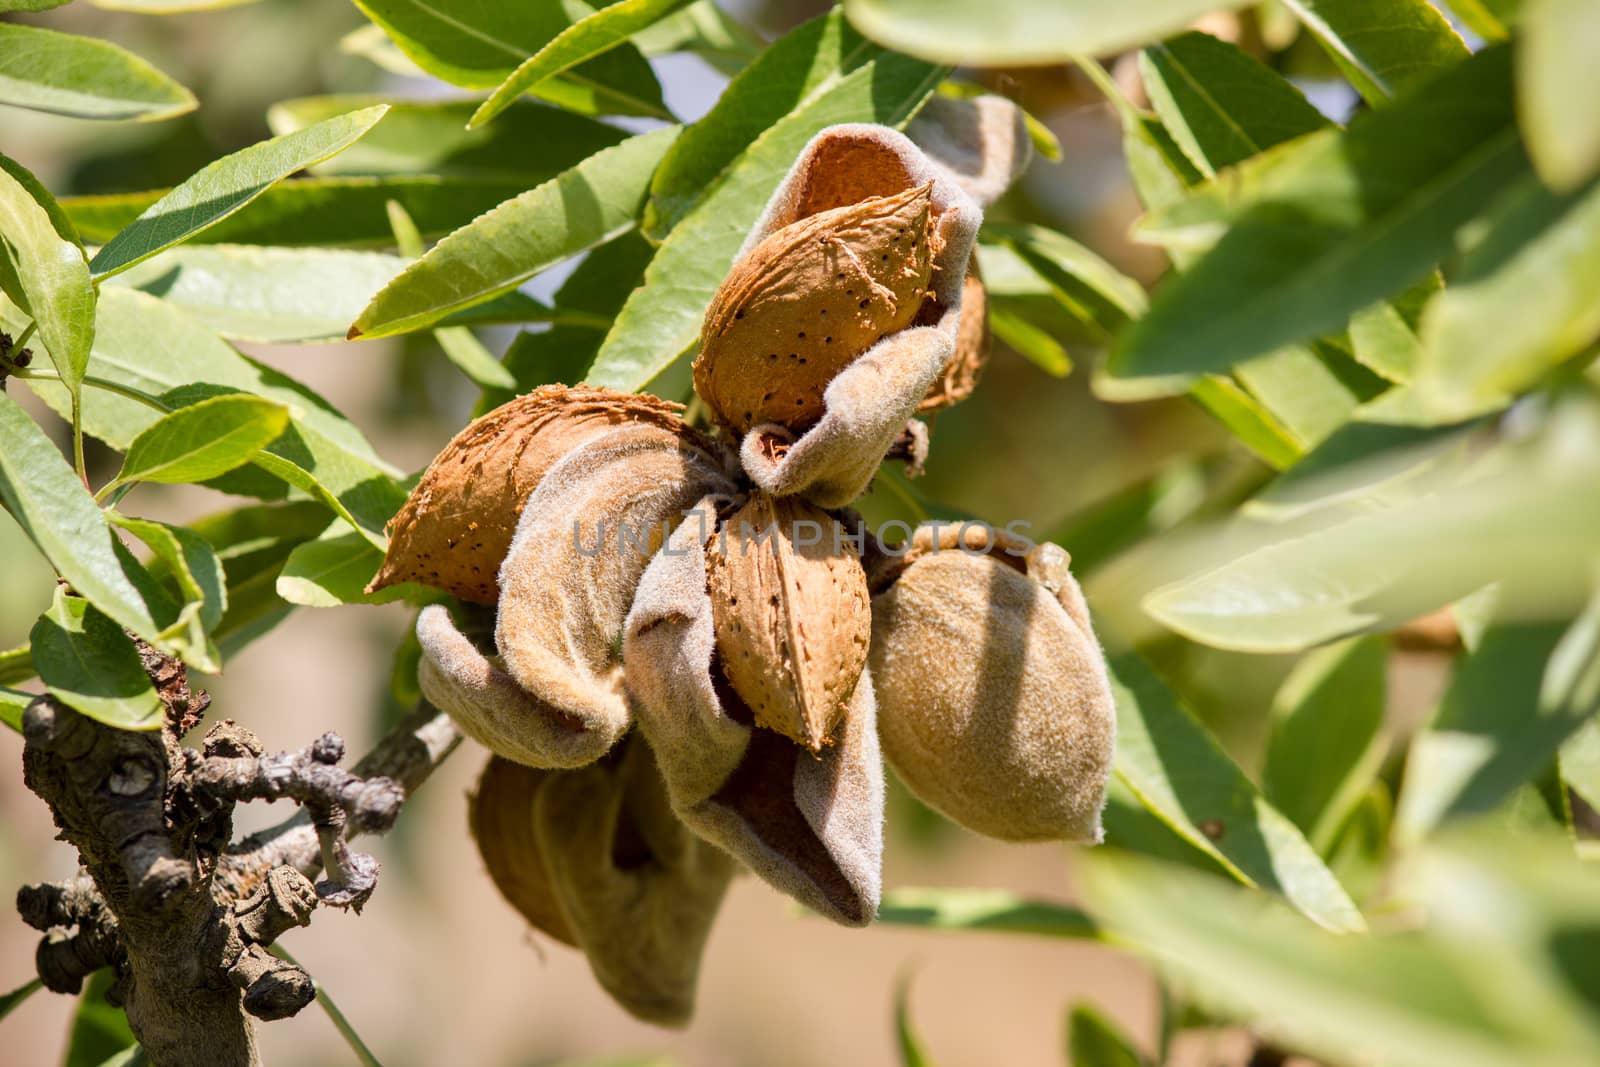 Branch of the tree of almonds, ready for harvest in late summer